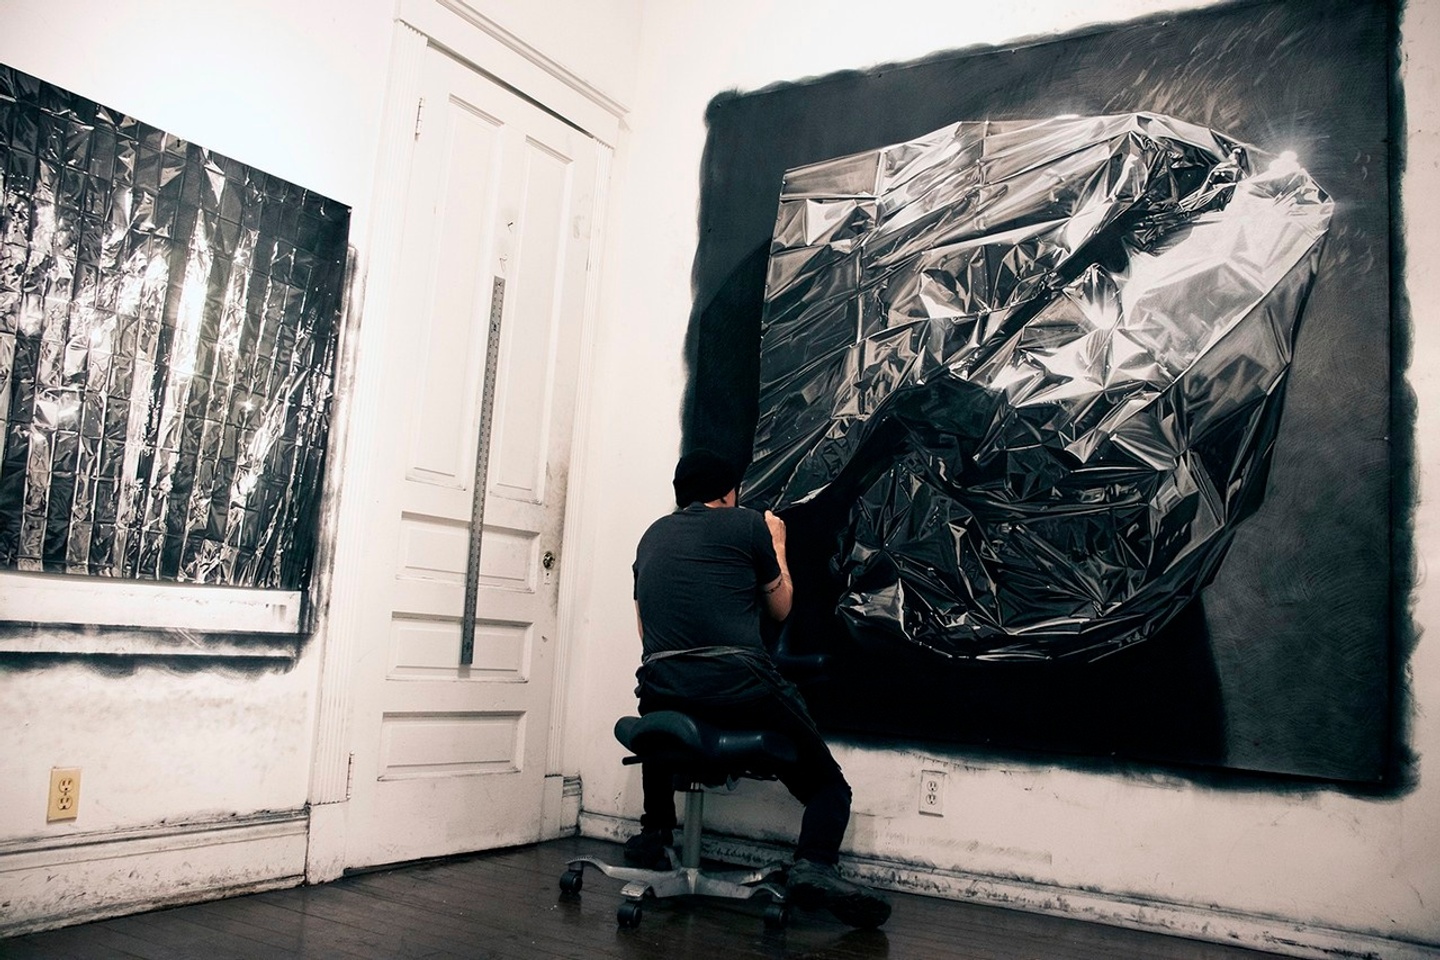 Man in studio working on large-scale black and white drawing of space blanket with another drawing hanging on wall next to him.